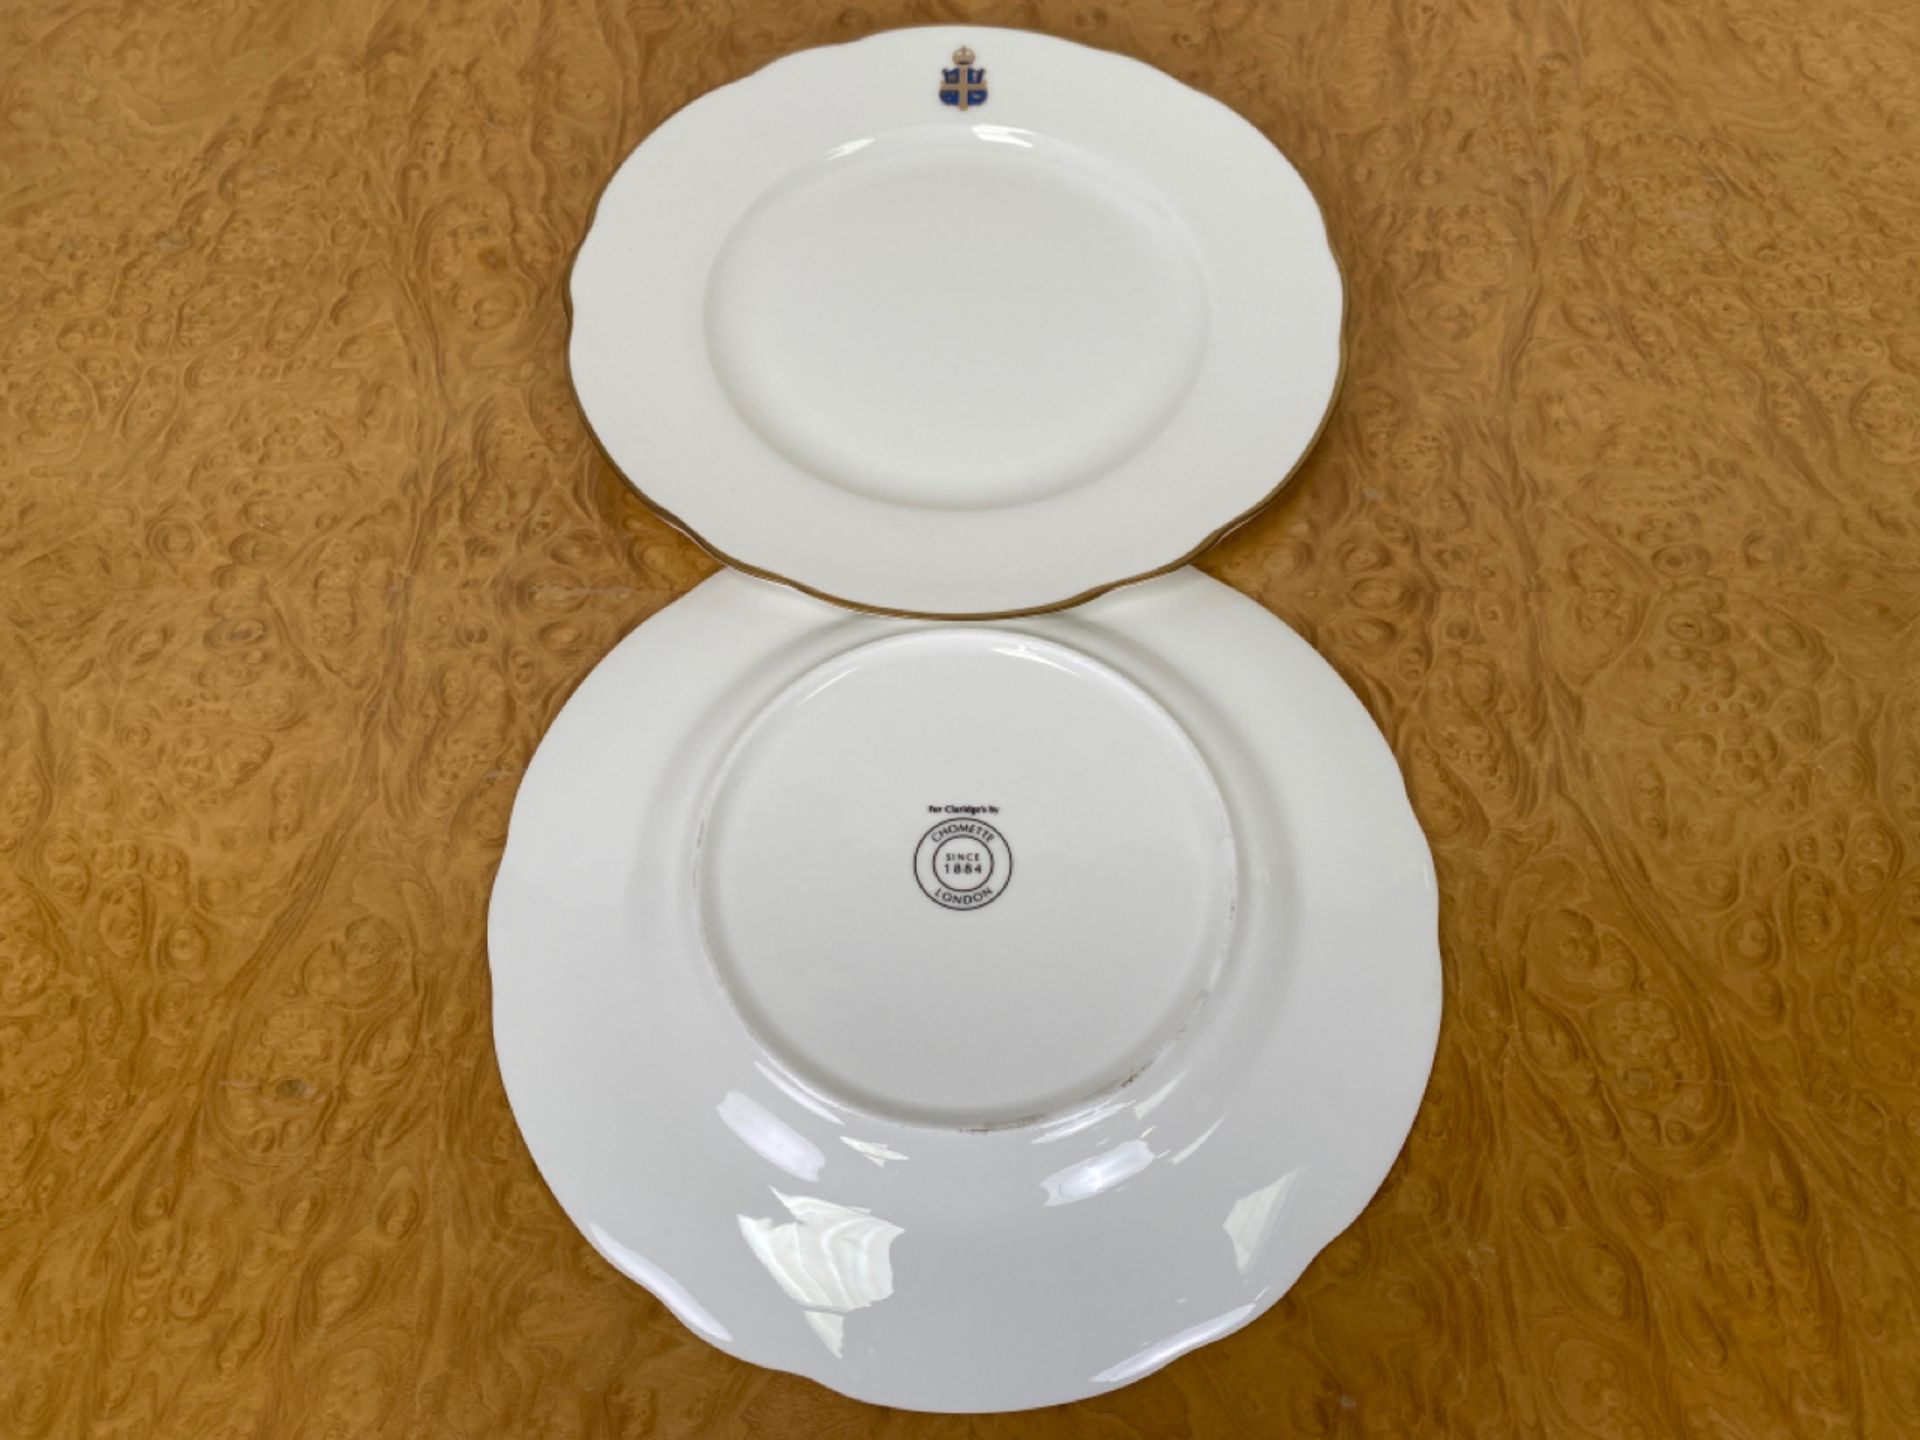 Set of 16 Crested Plates for Claridge's by Chommette 1884 (25cm and 31.5cm) - Image 7 of 9